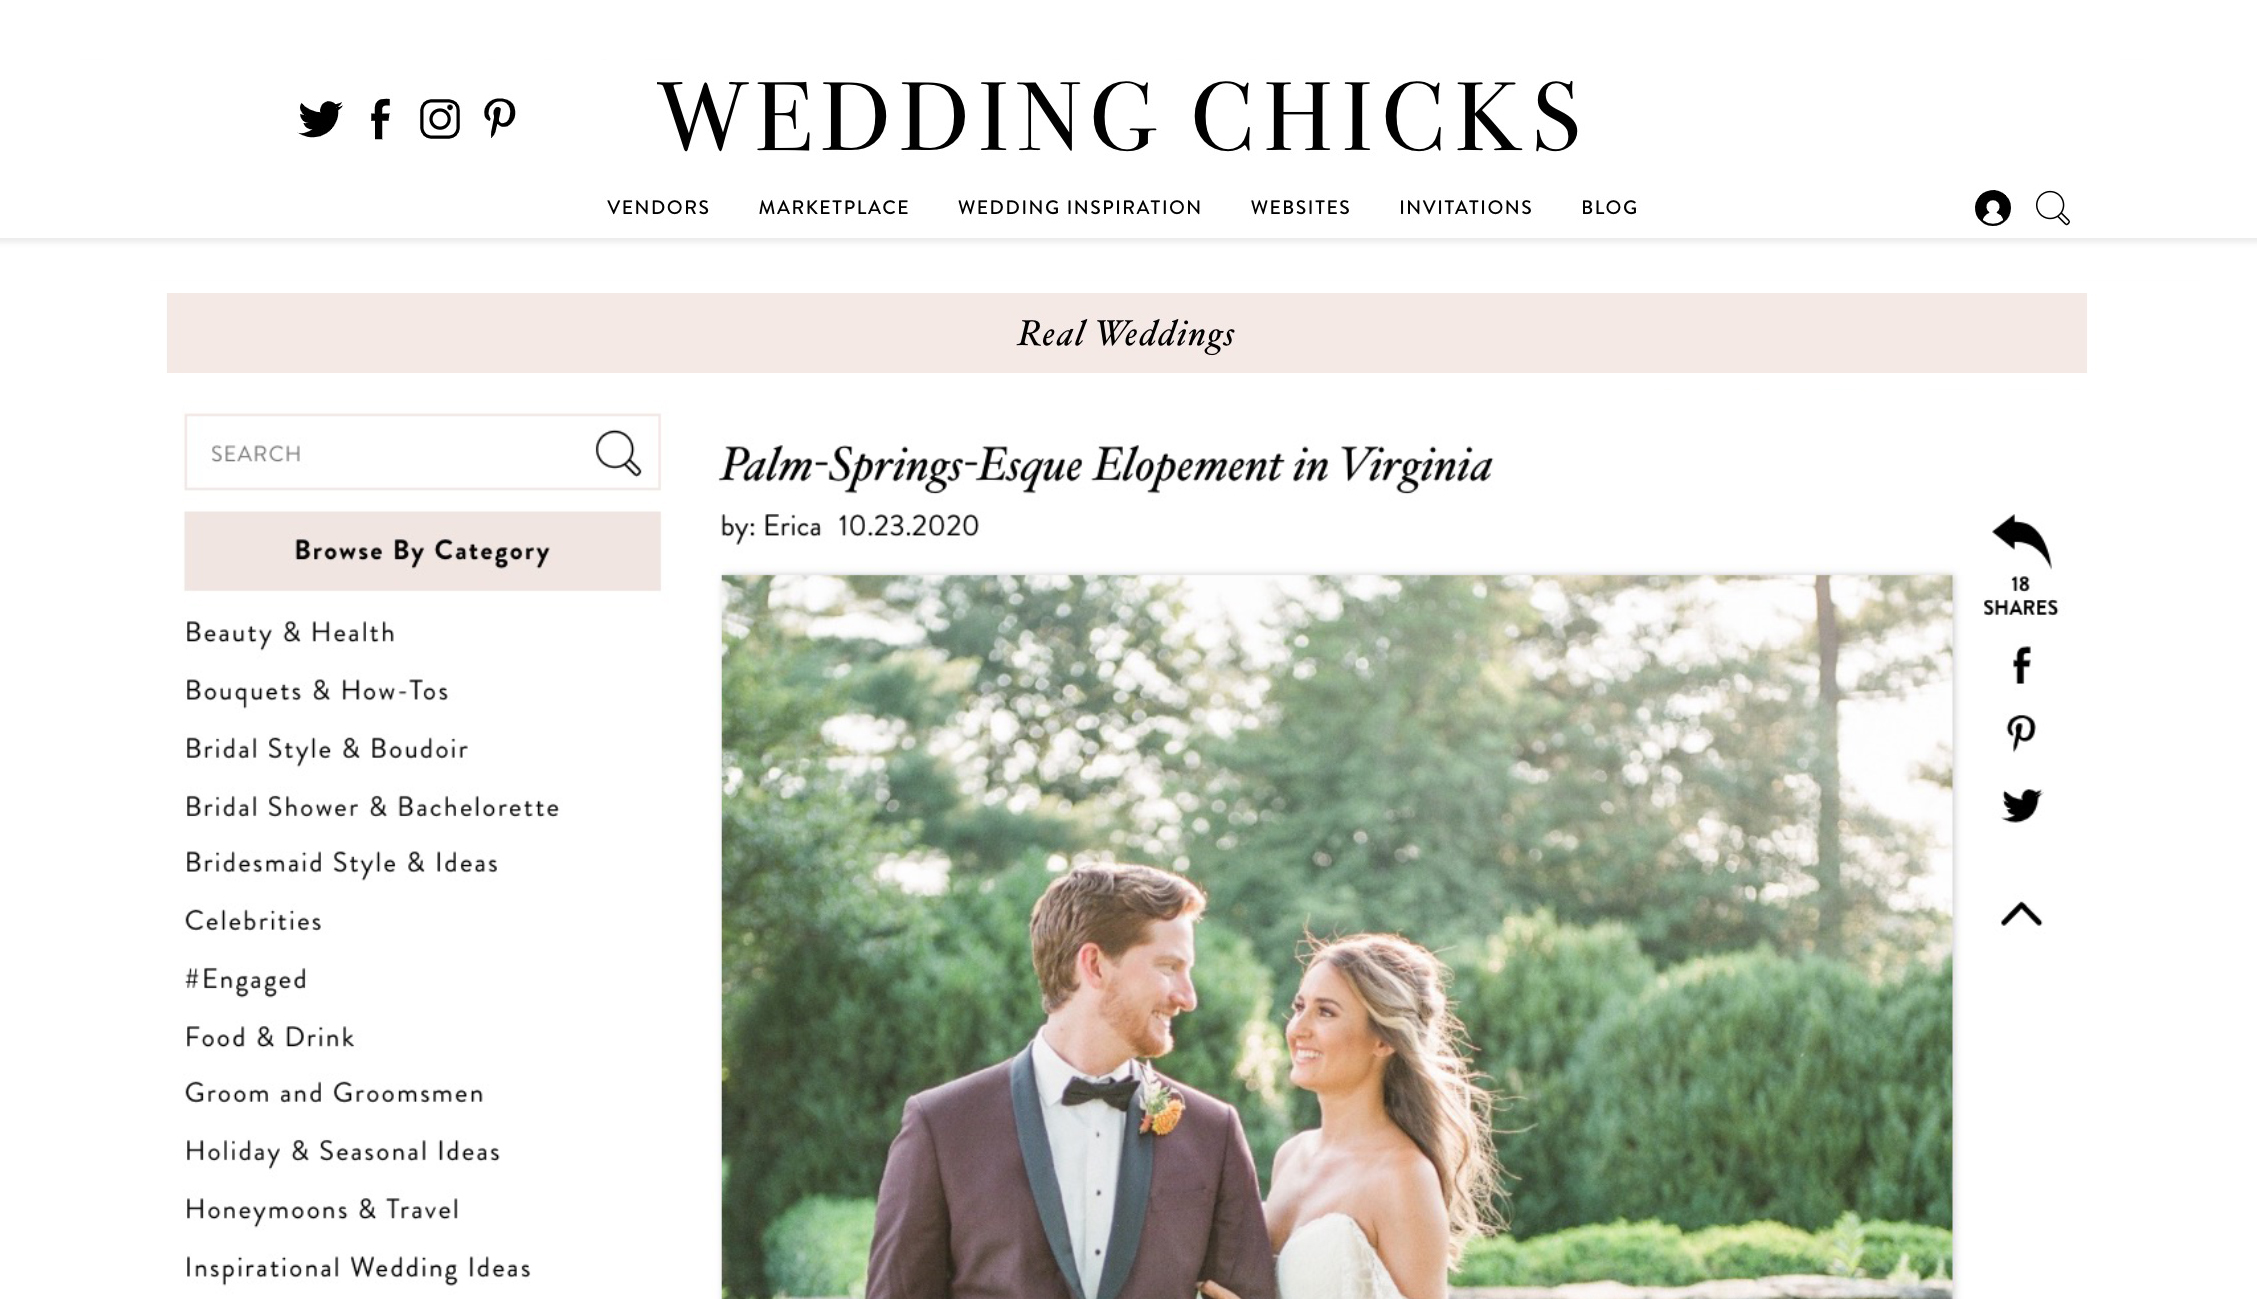 An intimate elopement wedding celebration with a Palm Springs twist at Oatlands Historic Home and Gardens in Leesburg, VA.